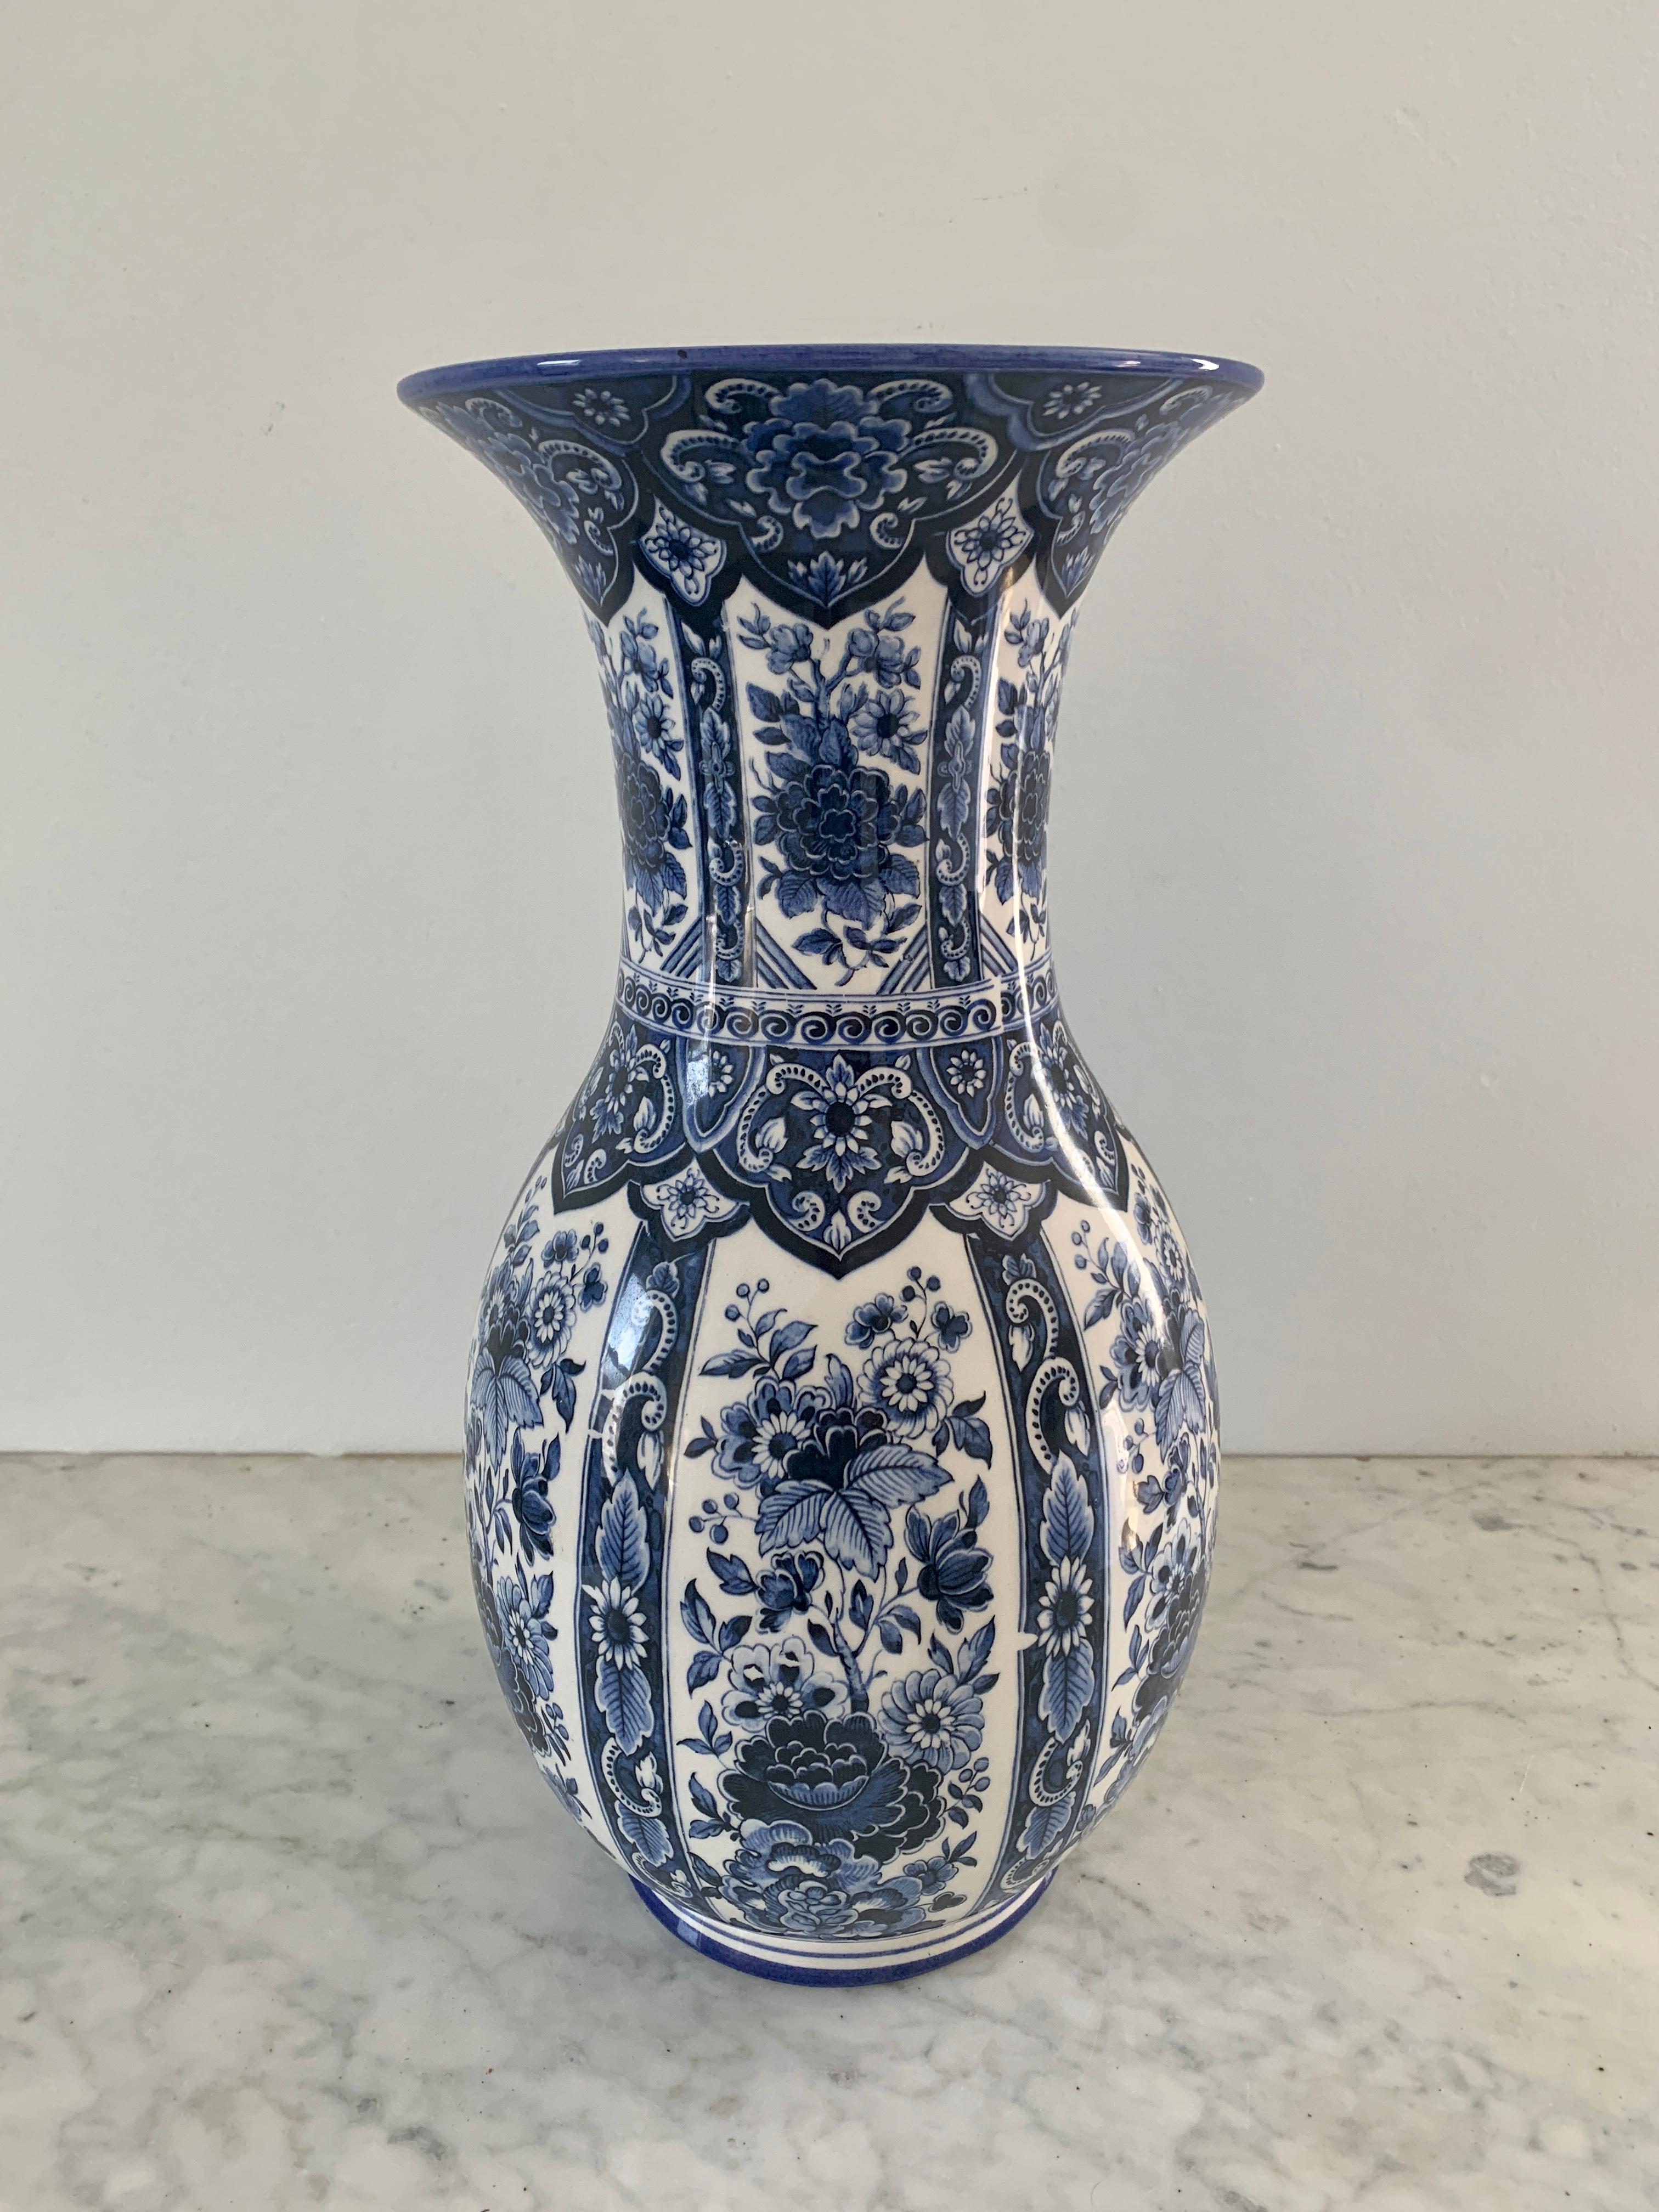 20th Century Delfts Blue and White chinoiserie Porcelain Vase